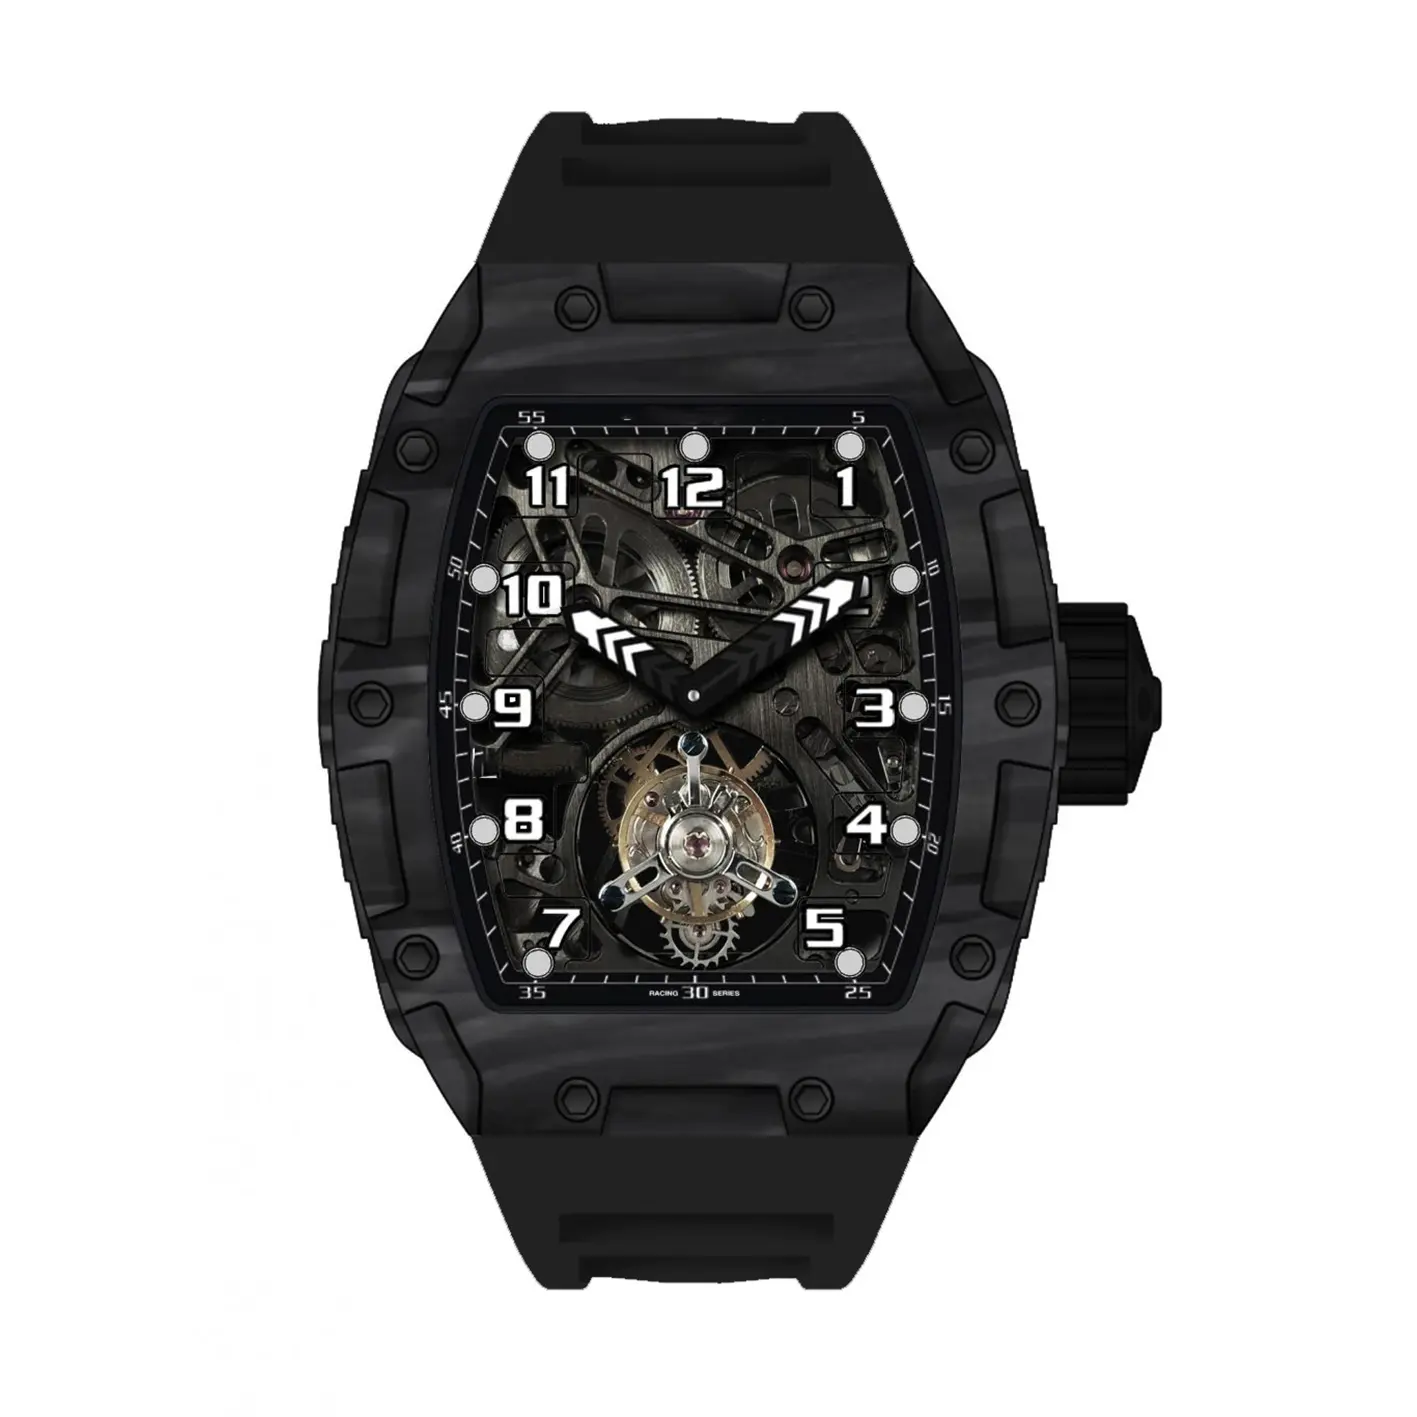 Real Carbon Fiber Watch ,Carbon Fiber Watch Case with Flying Tourbillon Movement Watch